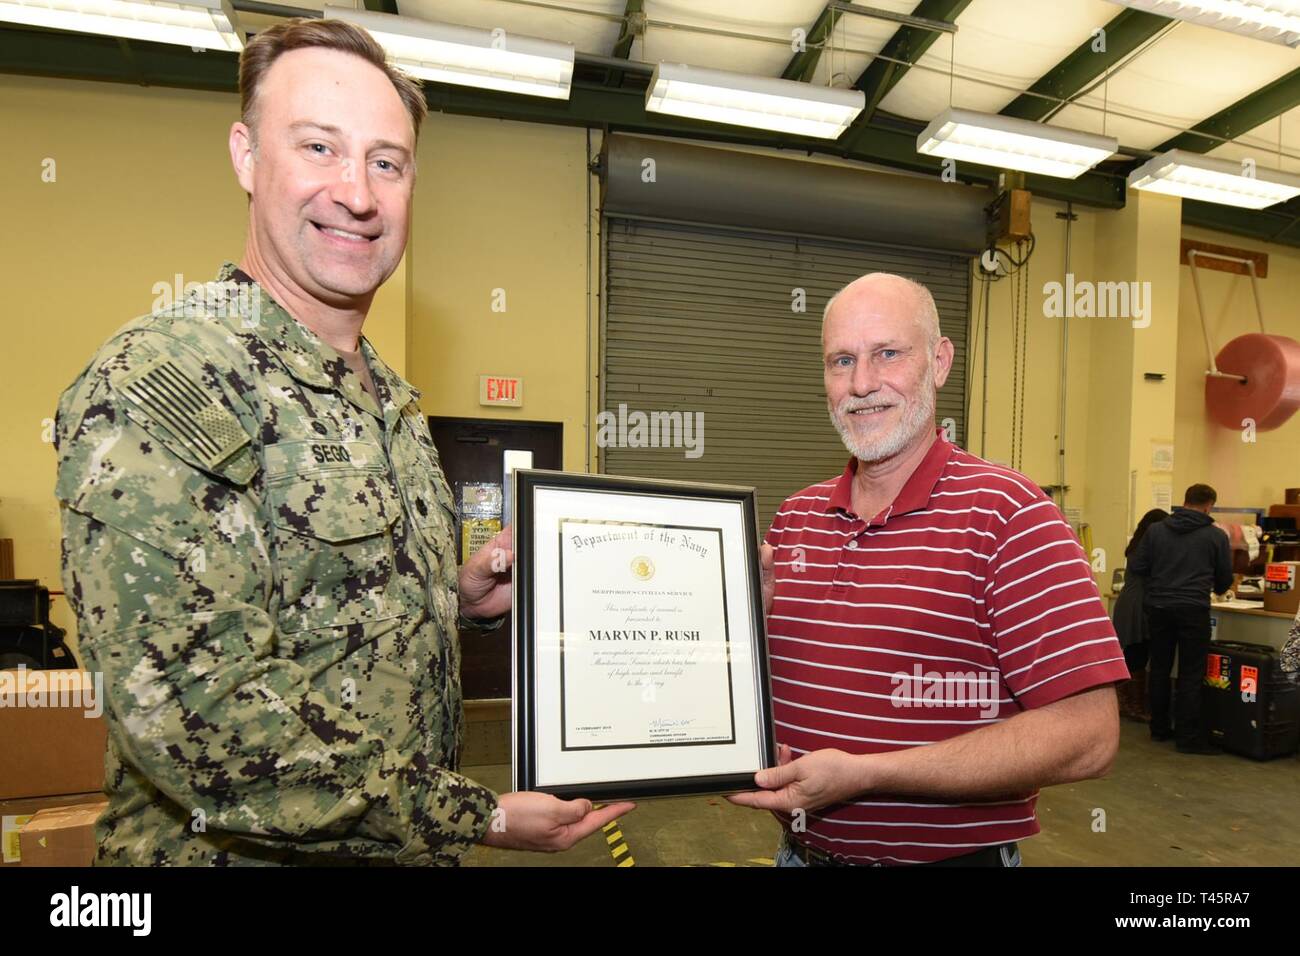 Panama City, FL -- (Mar. 7, 2019) Mr. Marty Walsh, site director for Naval Supply Command, Fleet Logistics Center- Panama City is presented the Navy Meritorious Civilian Service Award by Naval Support Activity Panama City commanding officer Cmdr. Jay Sego on behalf of the Fleet Logistics Center Jacksonville.  Mr. Walsh was cited for his outstanding meritorious service and superior performance of his duties while supporting the NSA Panama City Emergency Operations Center during Hurricane Michael recovery efforts.  His team quickly and effectively provided fuel, food, and water support to the ba Stock Photo